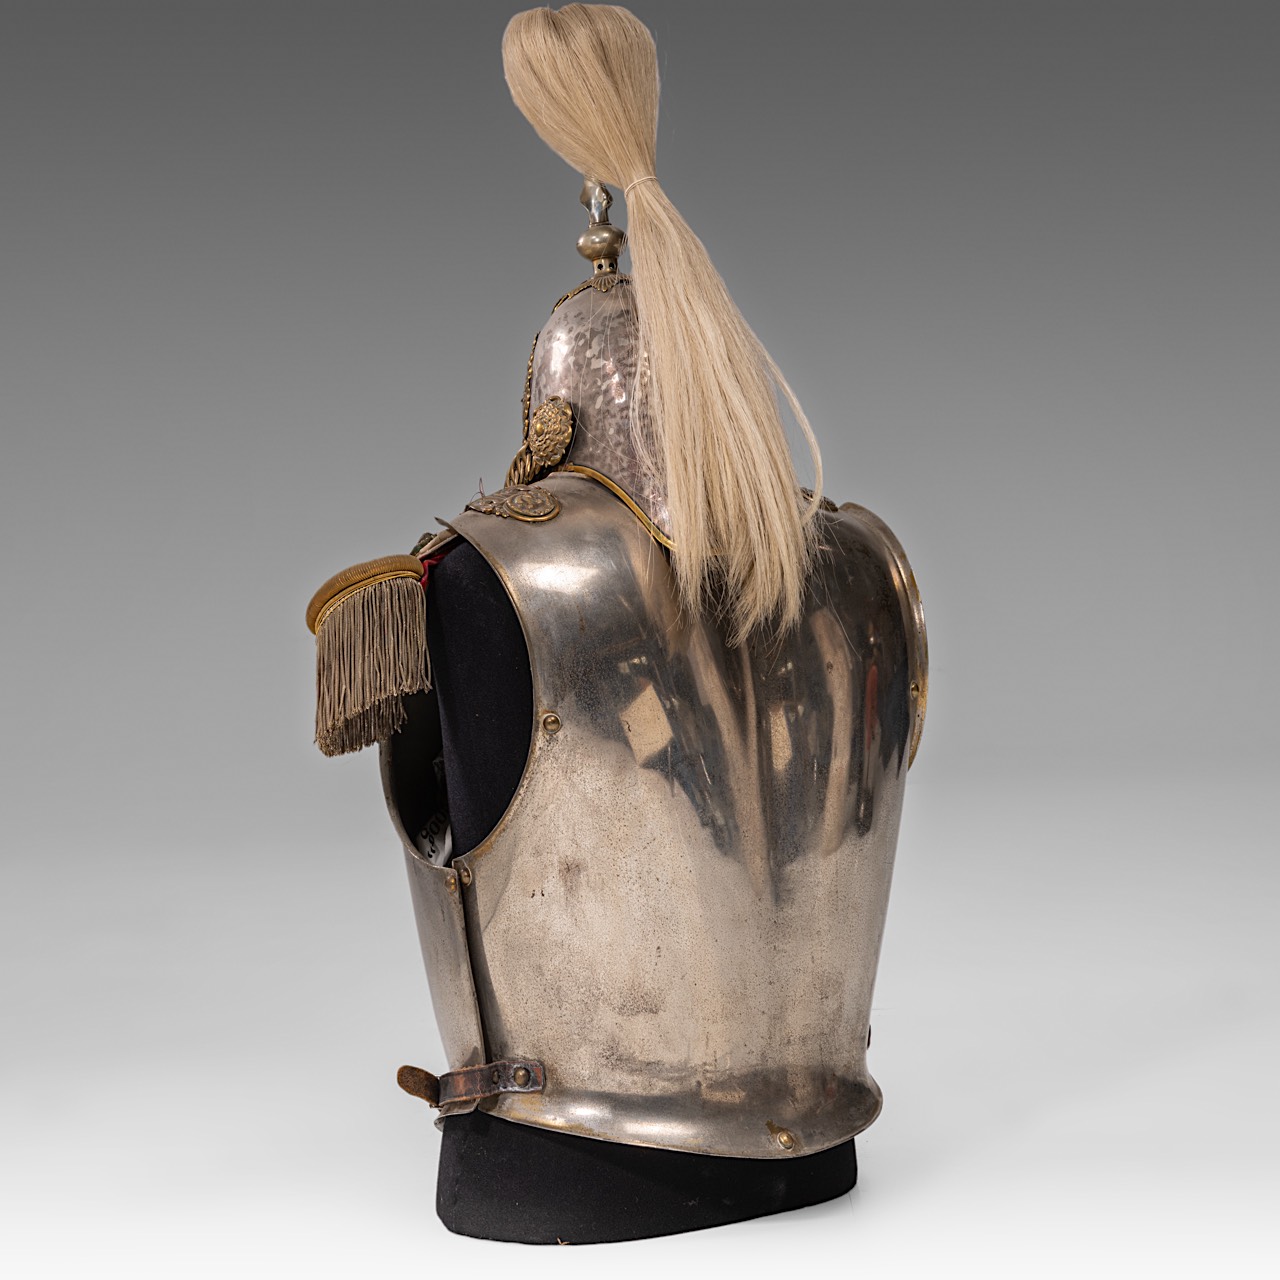 Cuirass and helmet of the Royal Horse Guards, metal and brass, Queen Victoria (1837-1901) - Image 4 of 8